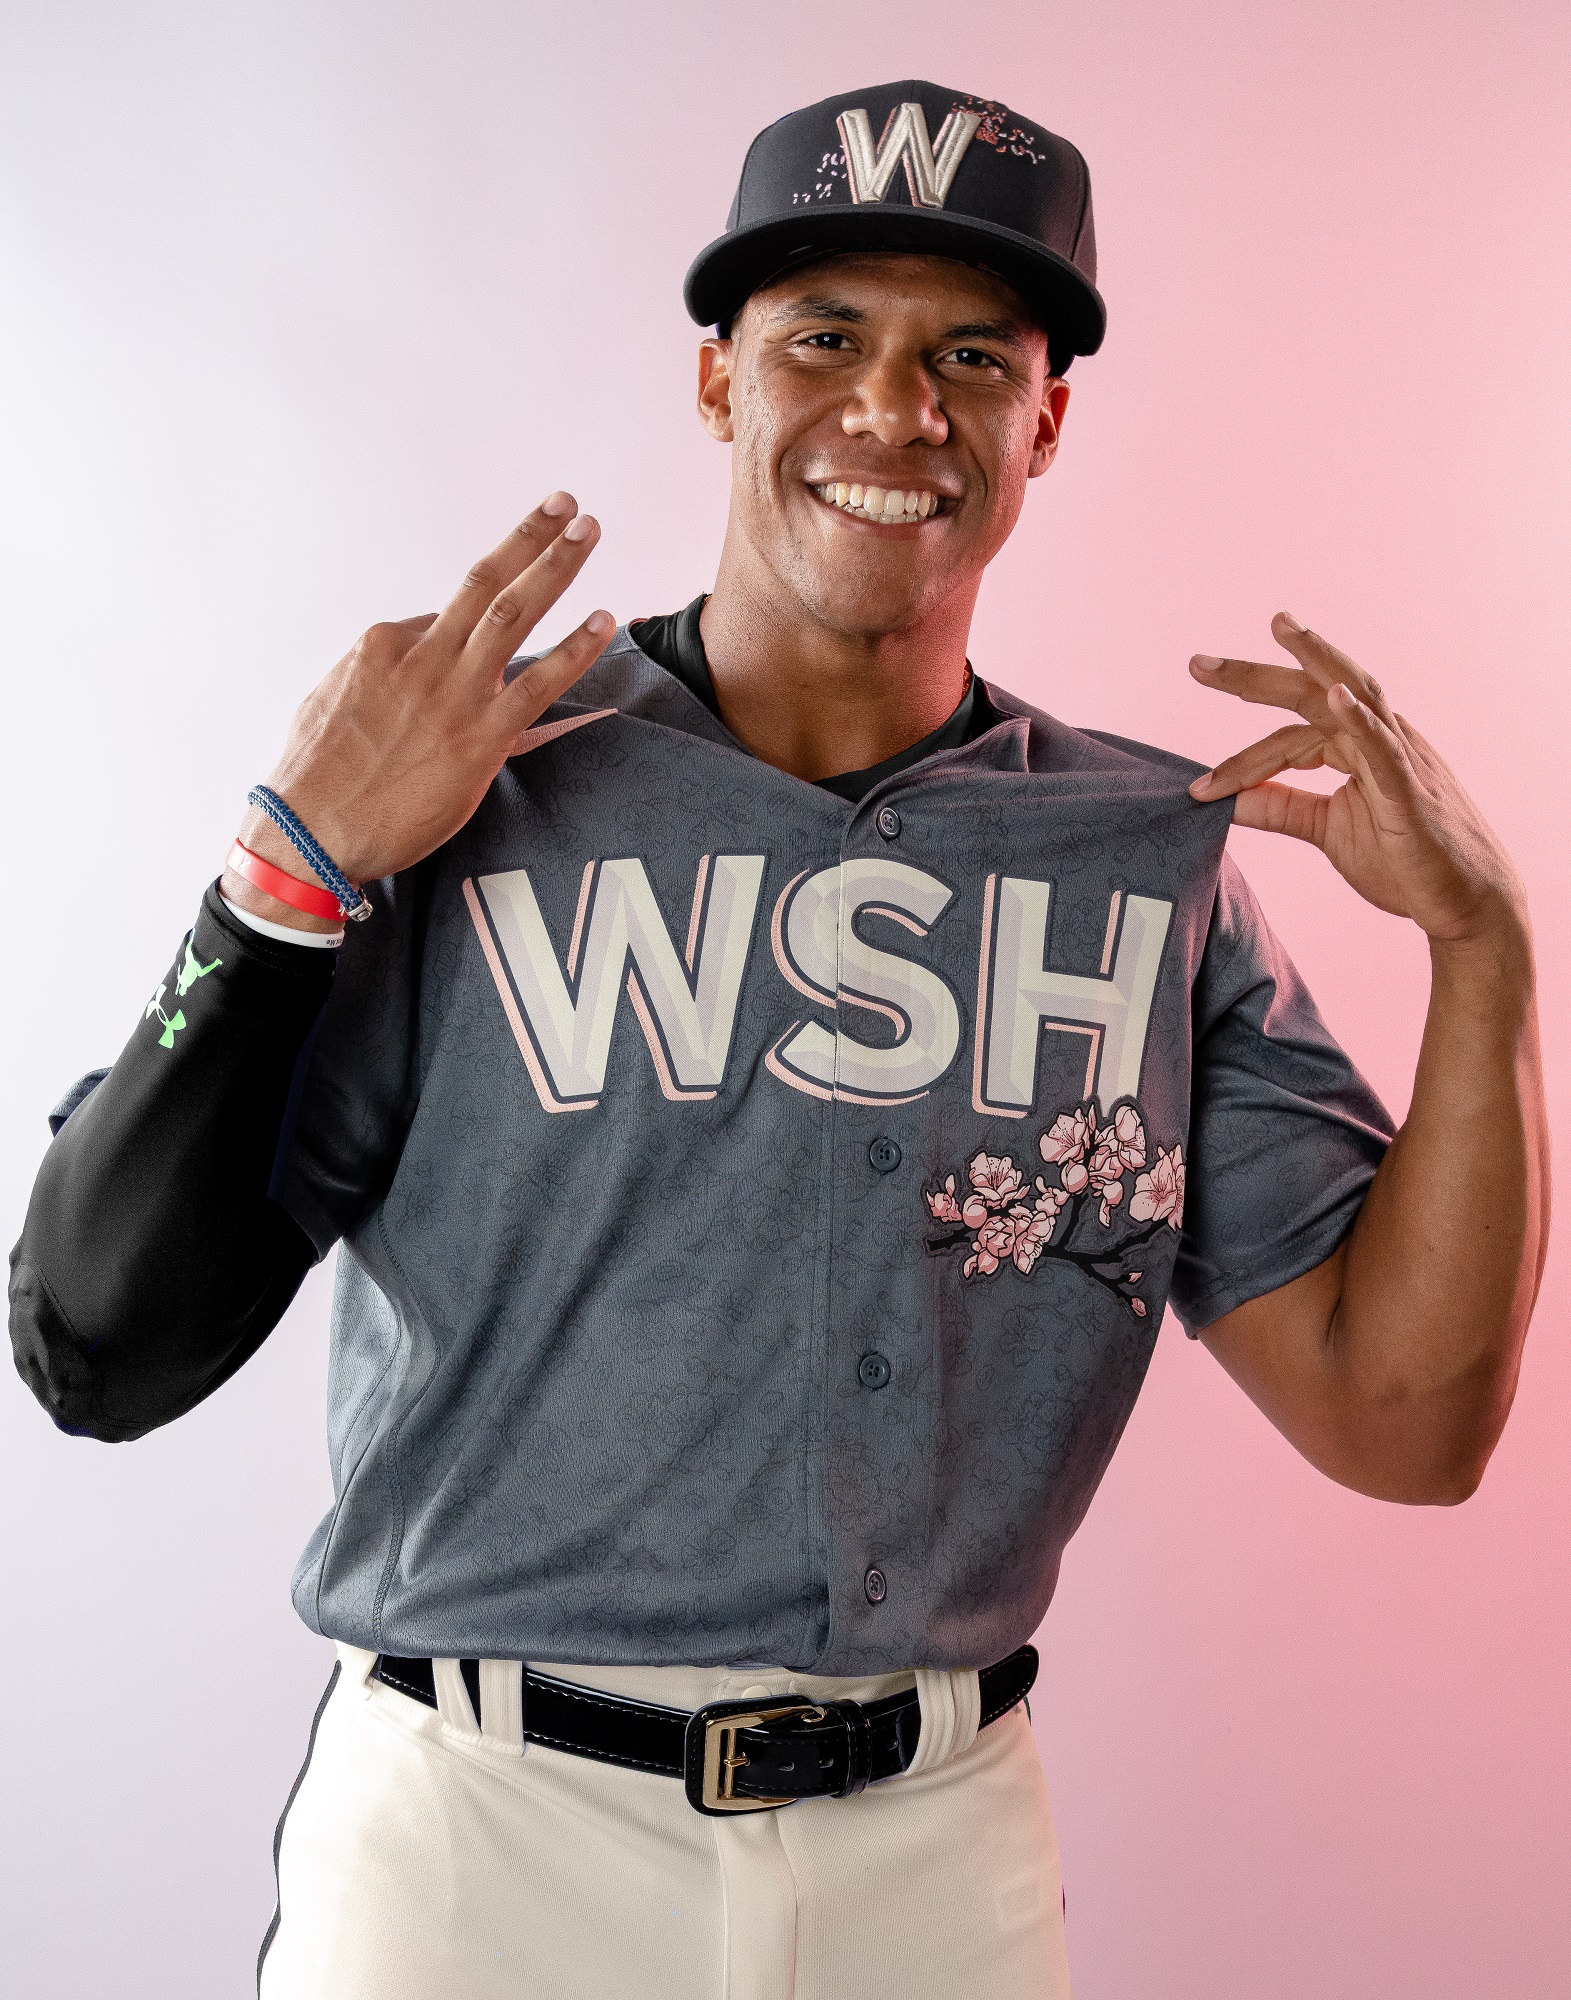 Nationals Juan Soto Has Been Traded to the San Diego Padres